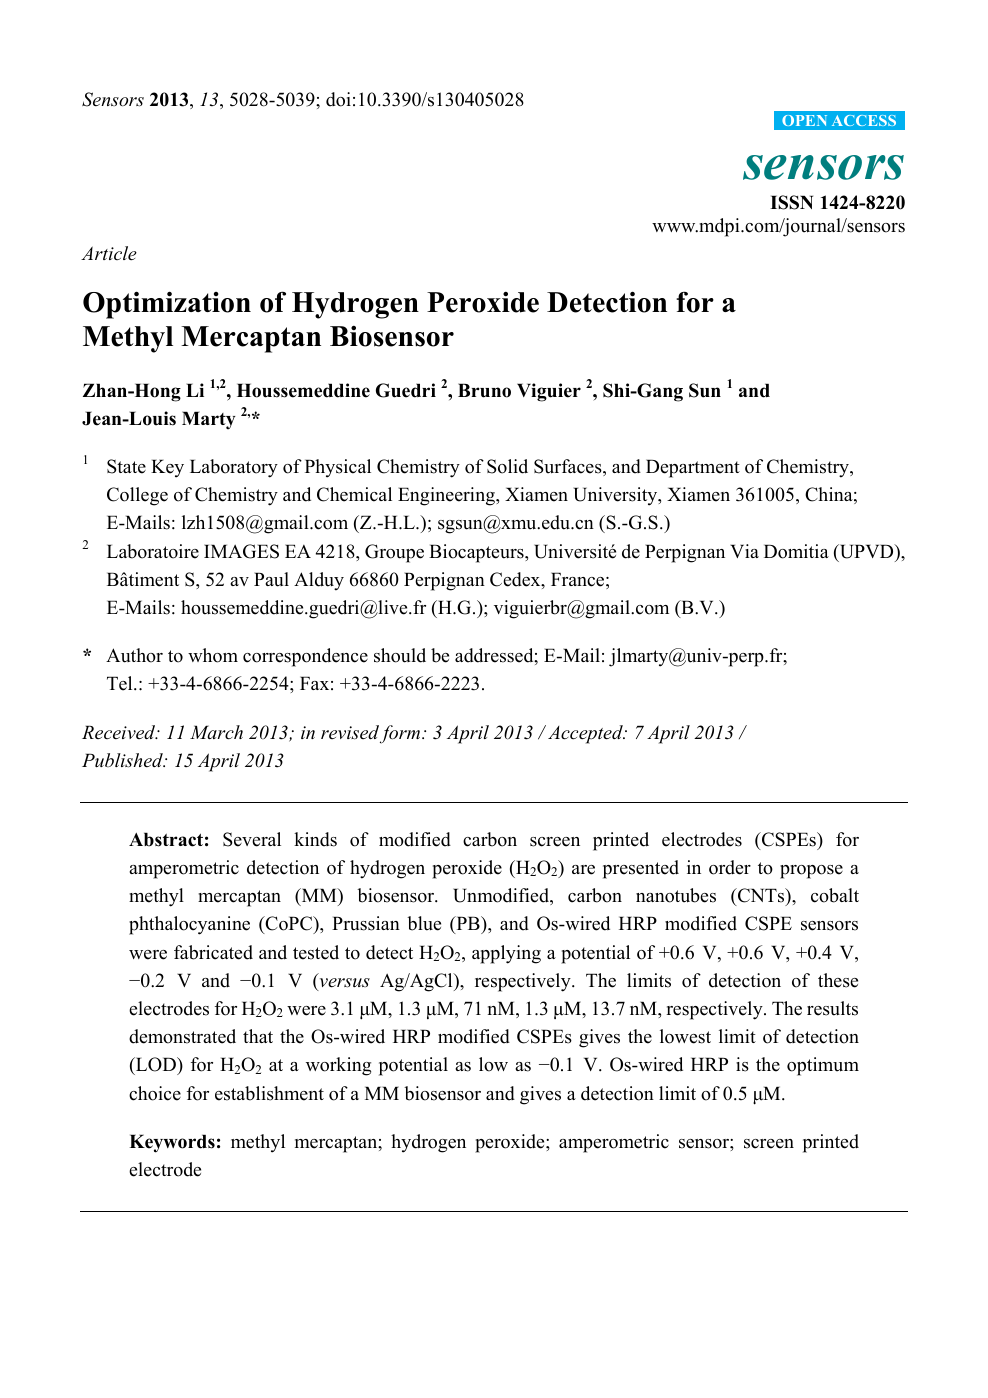 Optimization Of Hydrogen Peroxide Detection For A Methyl Mercaptan Biosensor Topic Of Research Paper In Chemical Sciences Download Scholarly Article Pdf And Read For Free On Cyberleninka Open Science Hub